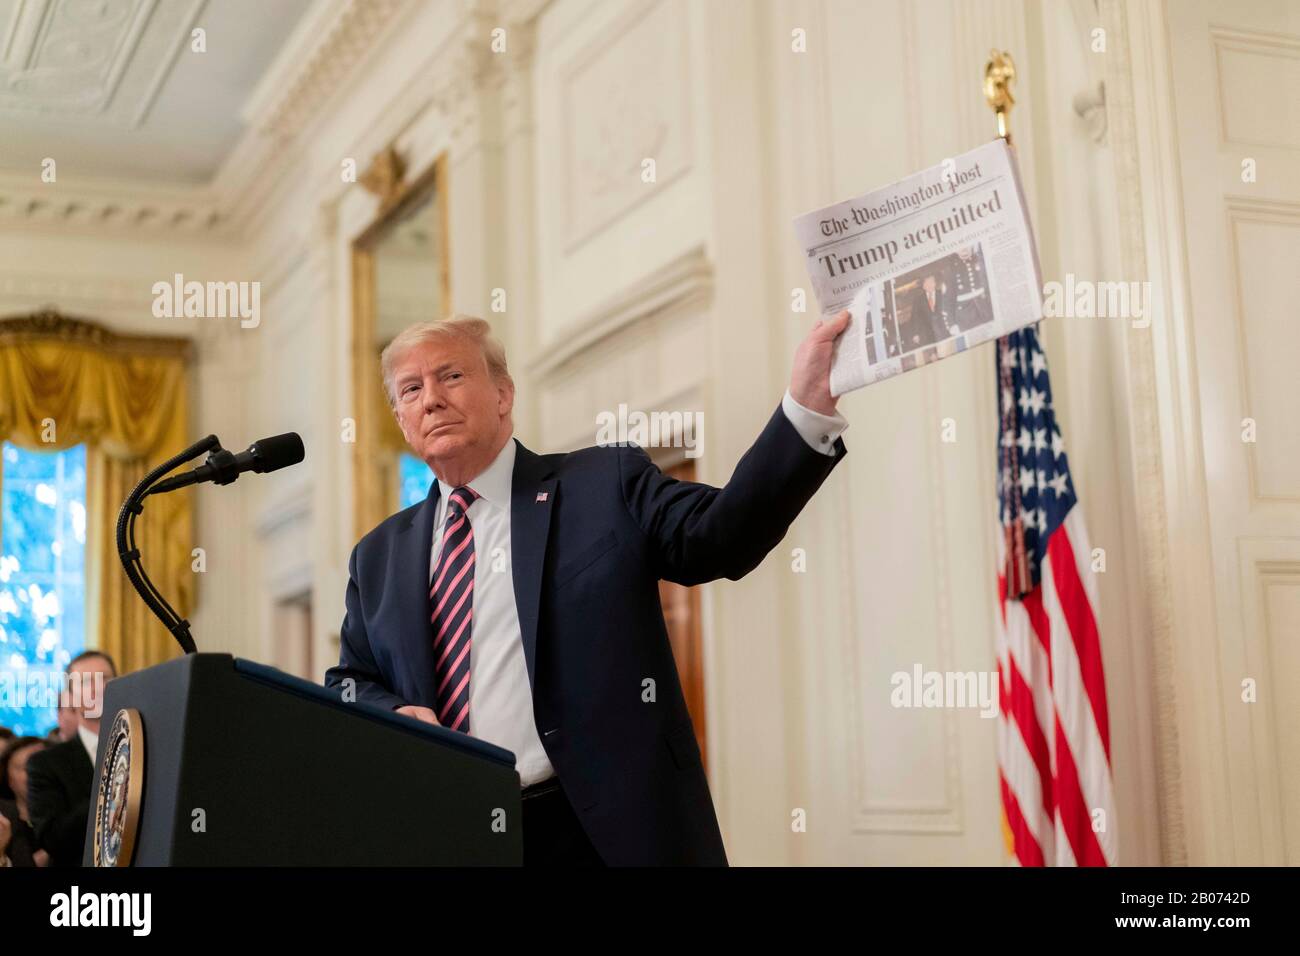 USA Washington DC -- 06 Feb 2020 -- President Donald J Trump holds up a copy of the Washington Post newspaper with a headline saying 'Trump acquitted' Stock Photo